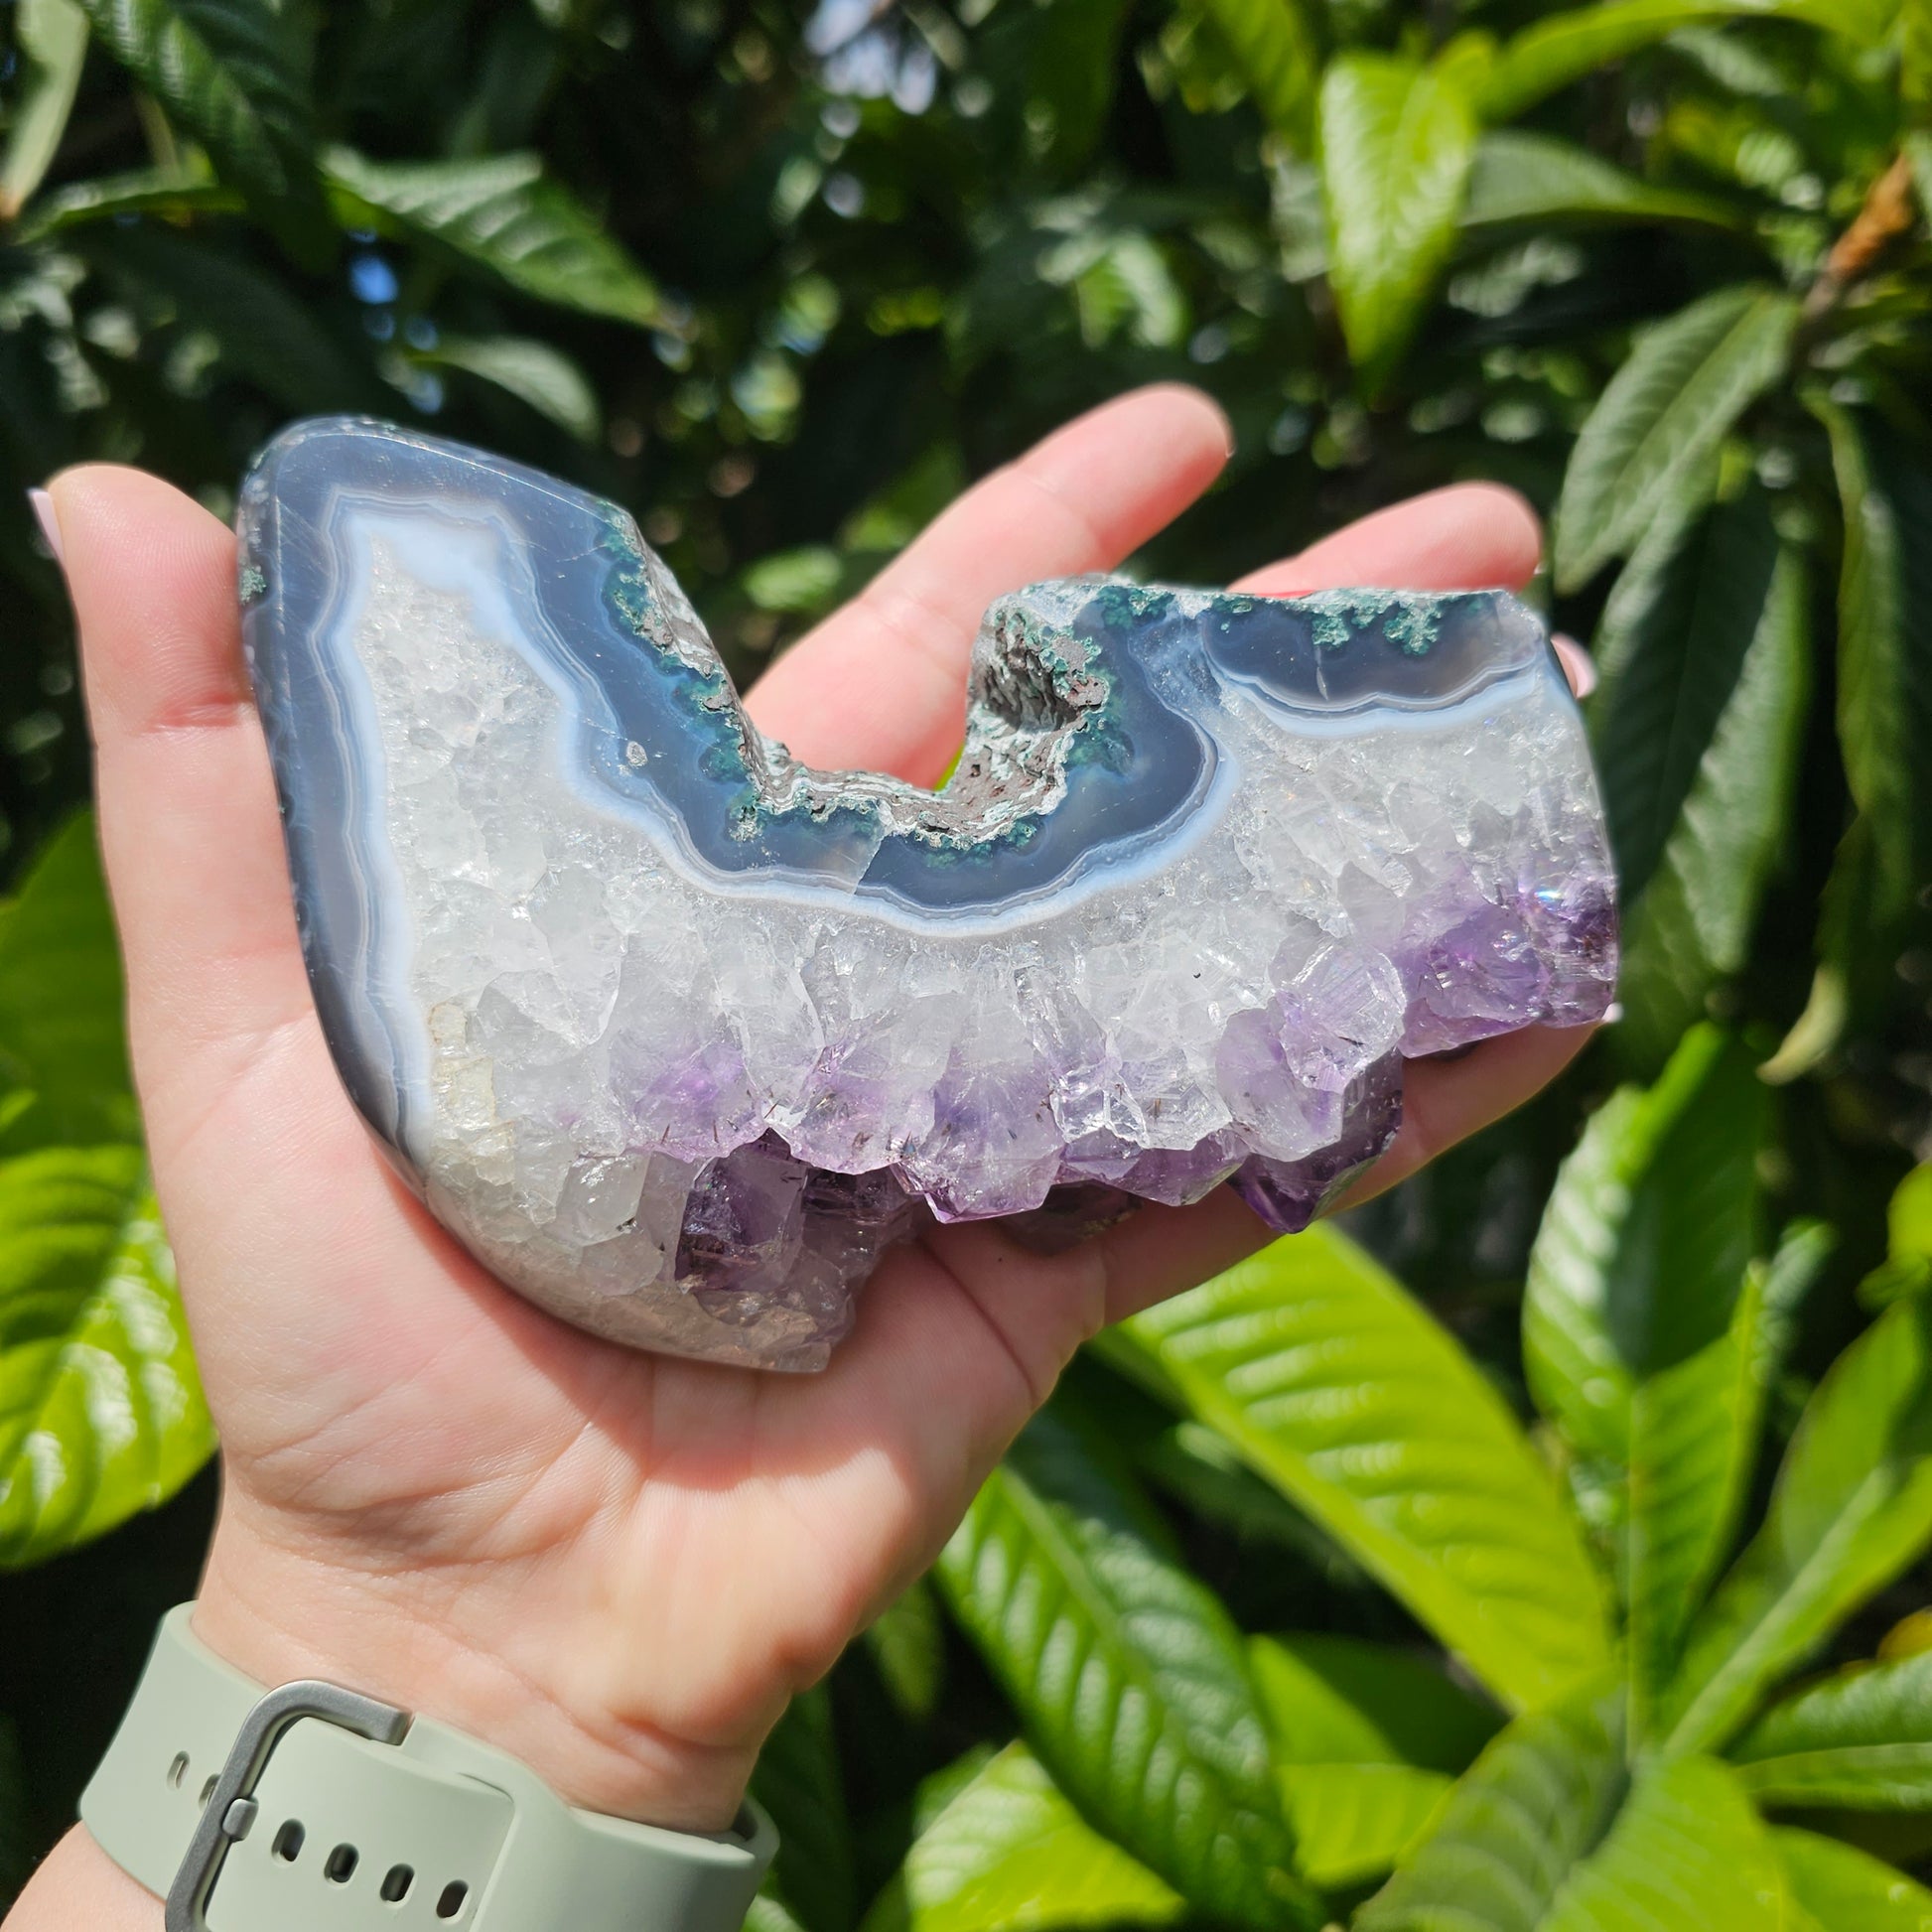 High polish irregular shaped Amethyst from Brazil with Agate banding | Home decor, pink amethyst carving, xmas gift, christmas gift, housewarming gift, red pink amethyst, special piece, crystal present